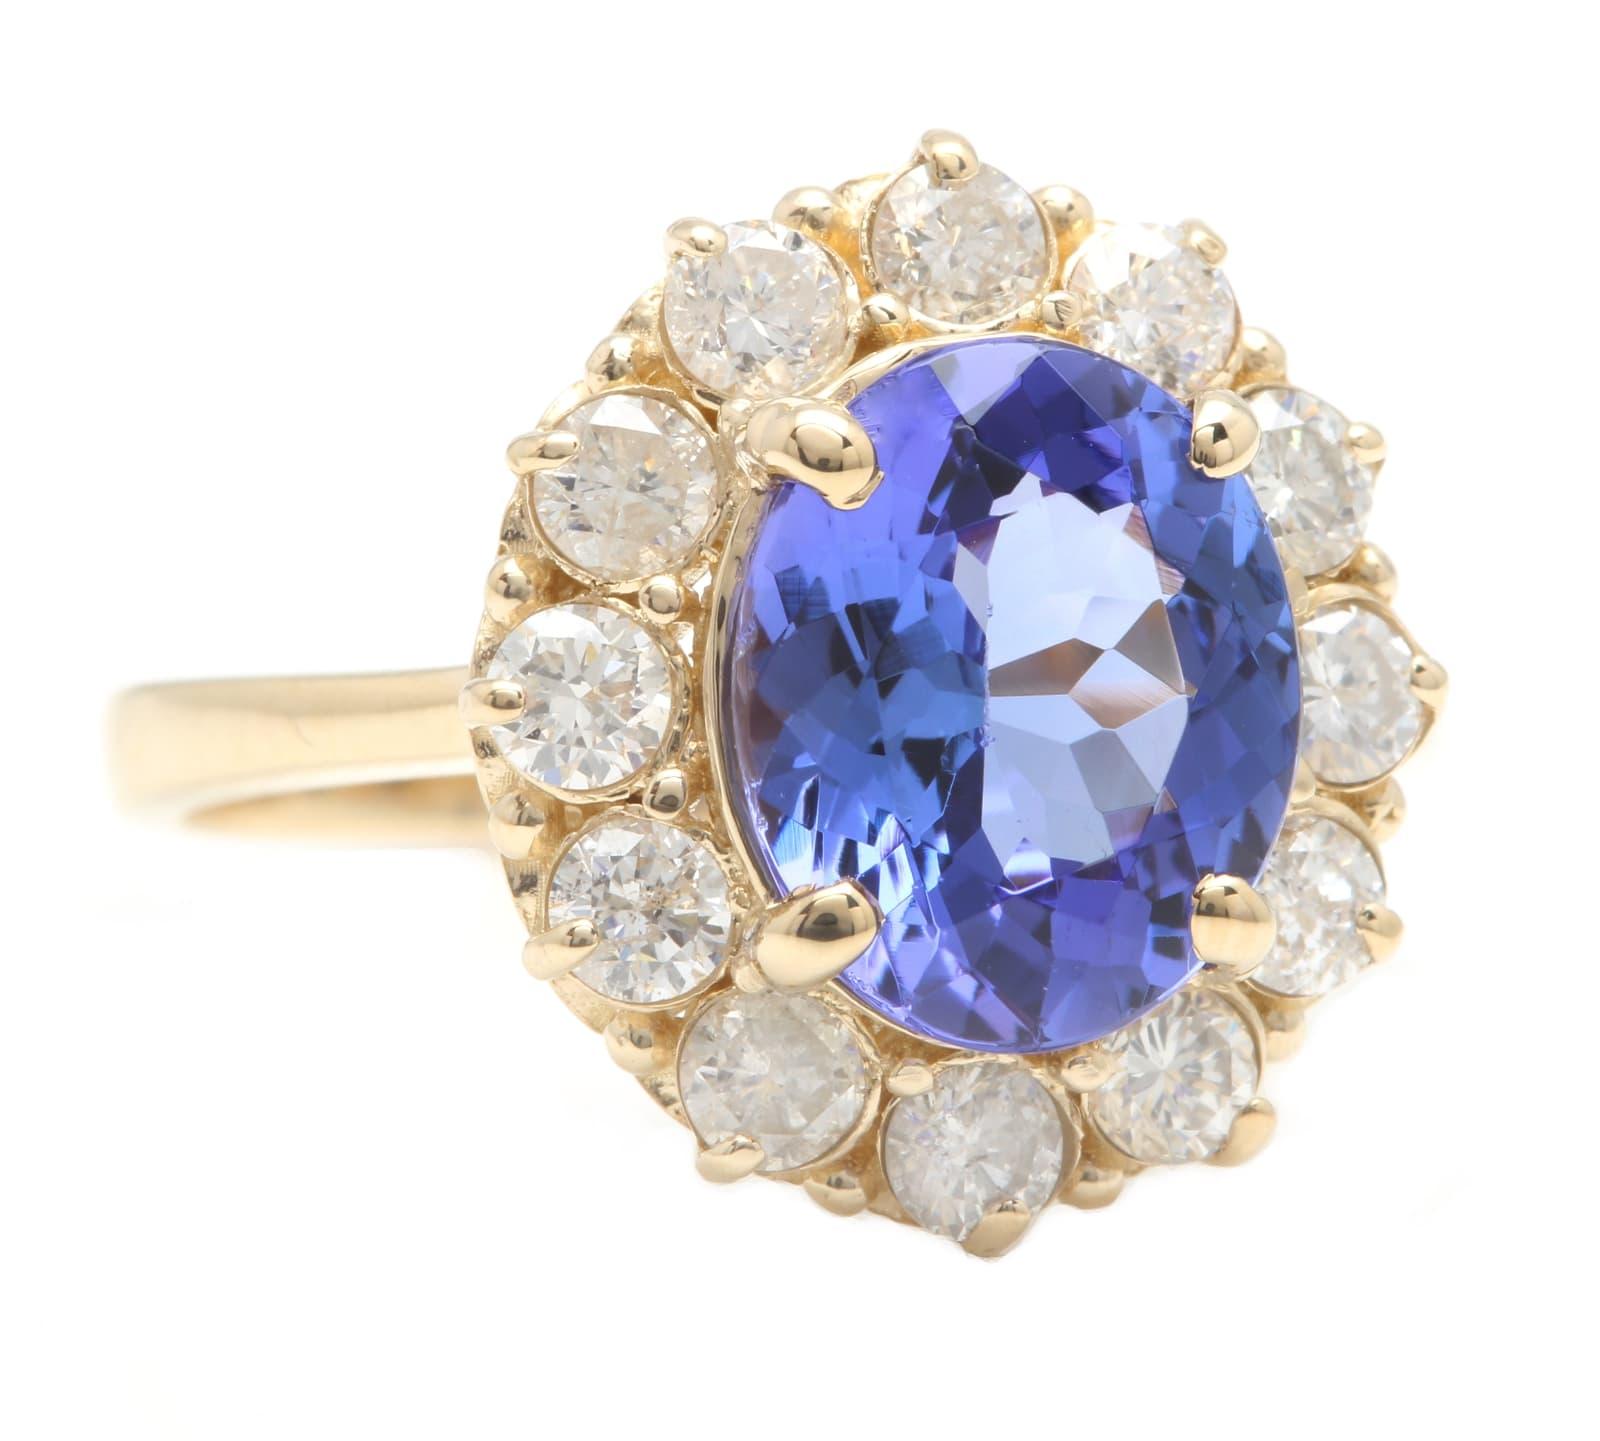 4.15 Carats Natural Very Nice Looking Tanzanite and Diamond 14K Solid Yellow Gold Ring

Suggested Replacement Value:  Approx. $7,800.00

Total Natural Oval Cut Tanzanite Weight is: Approx. 3.00 Carats

Tanzanite Measures: Approx. 10.00 x